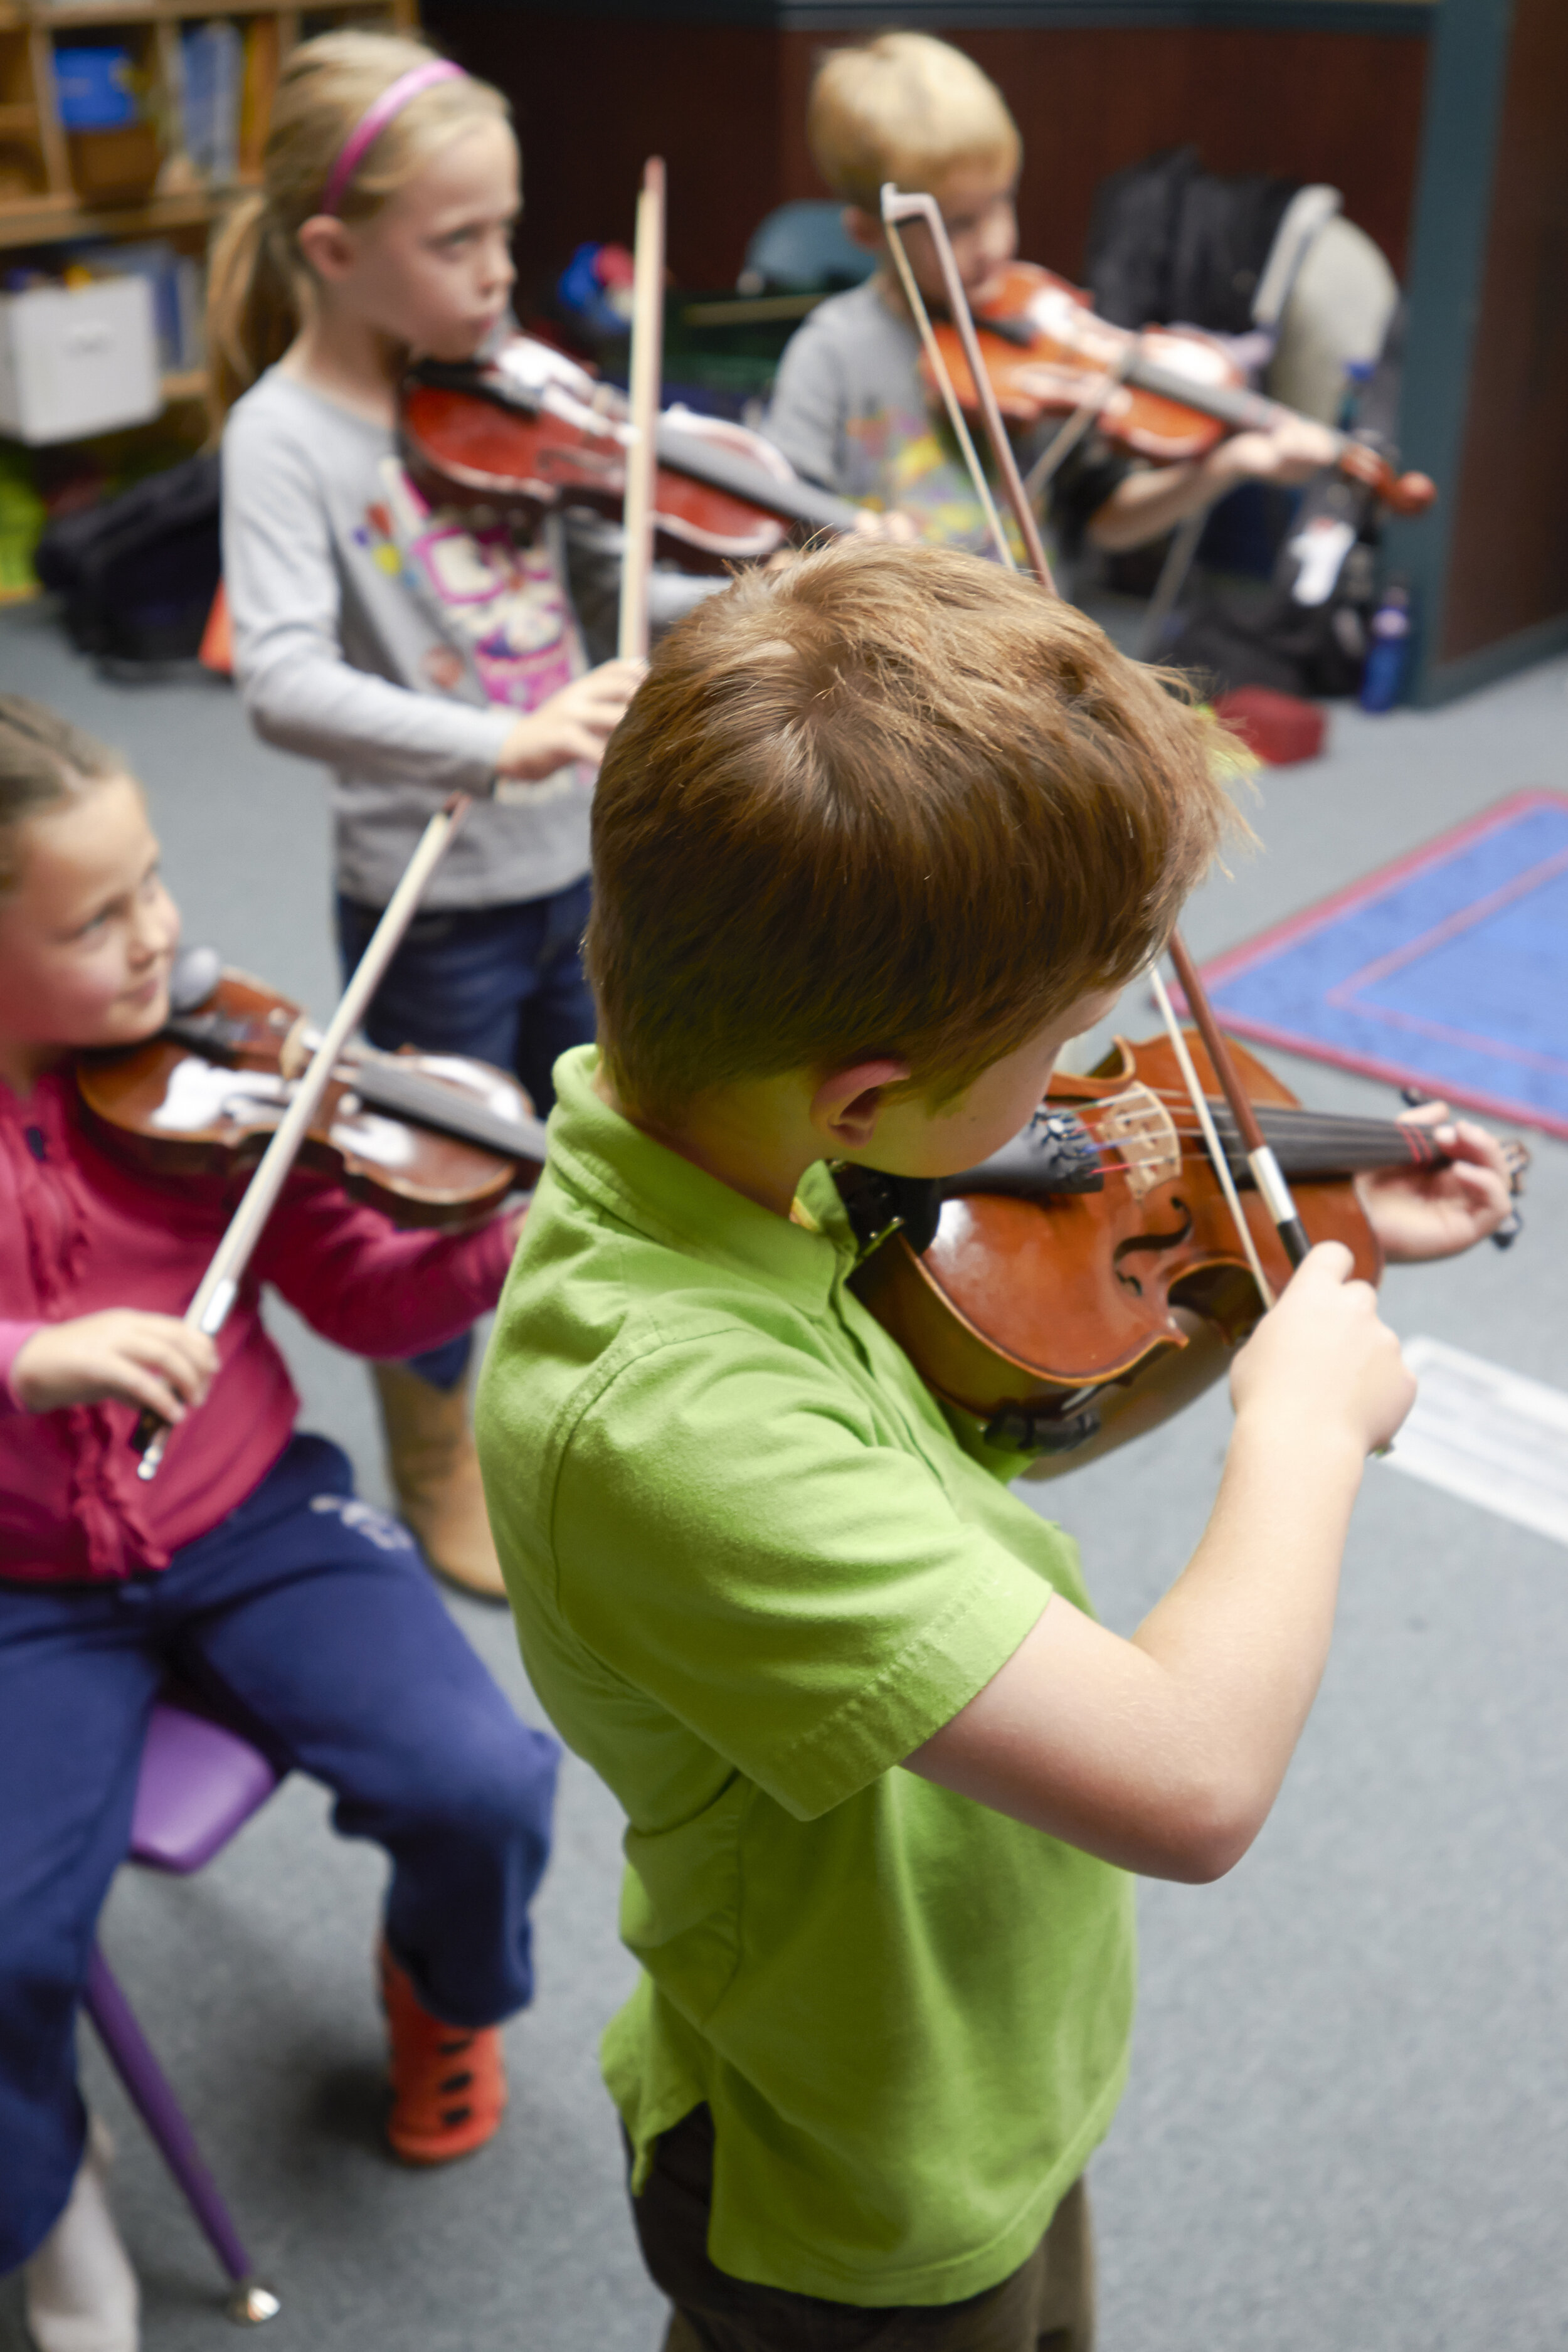 Students practice violin, recorder, and piano